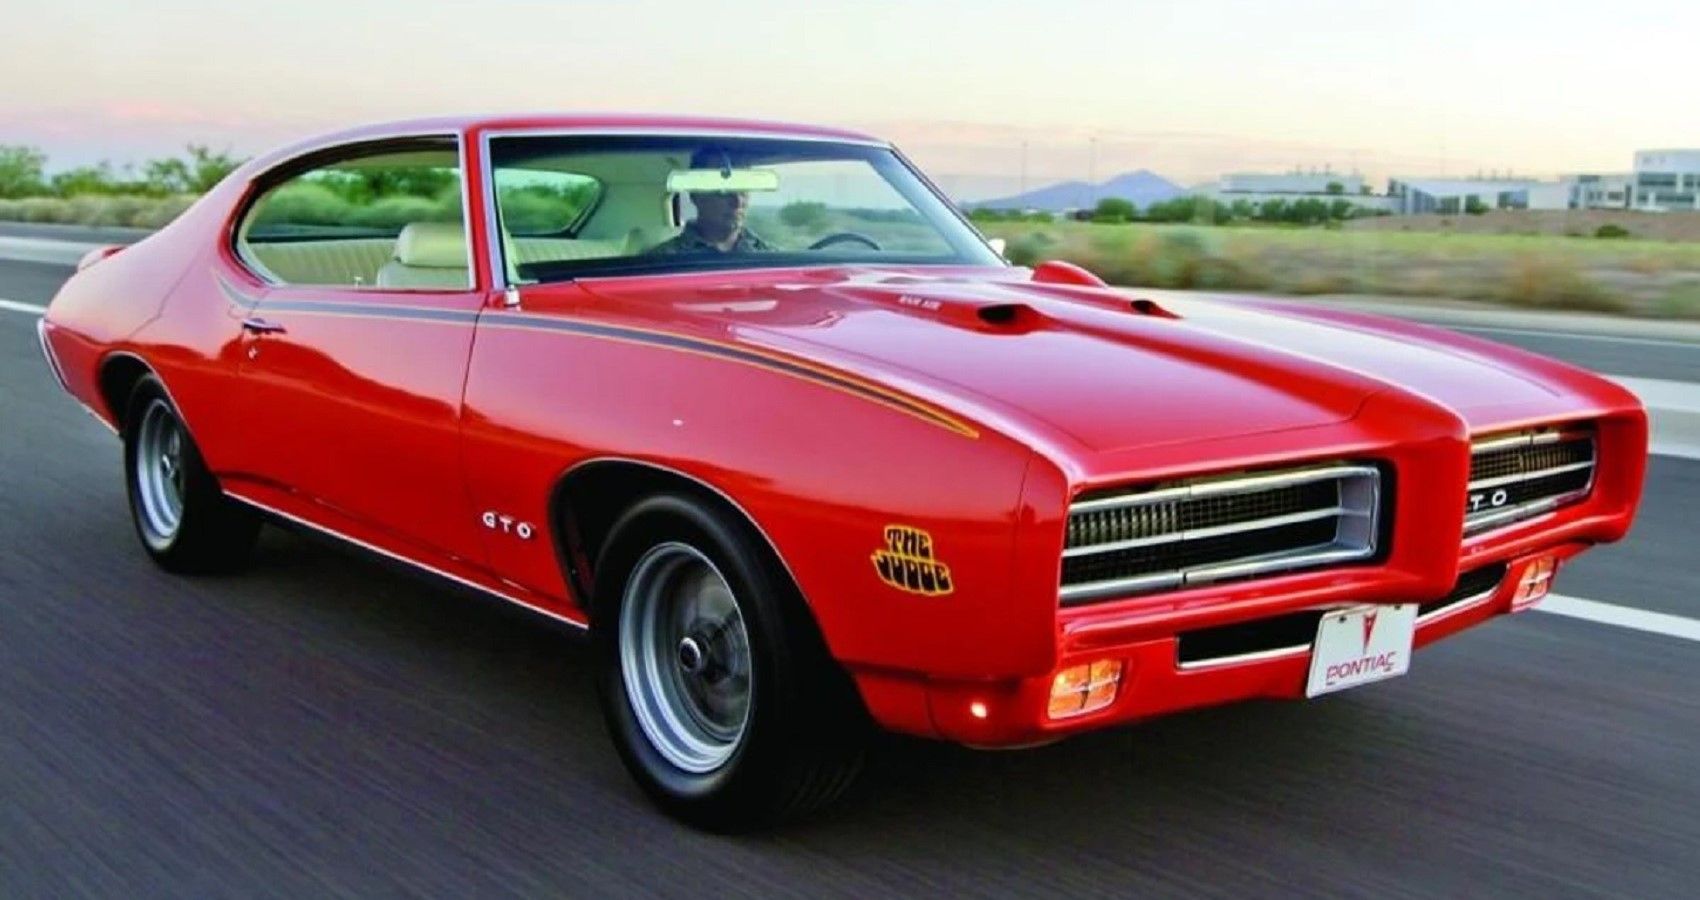 1969 Pontiac GTO Judge, front, Carousel Red